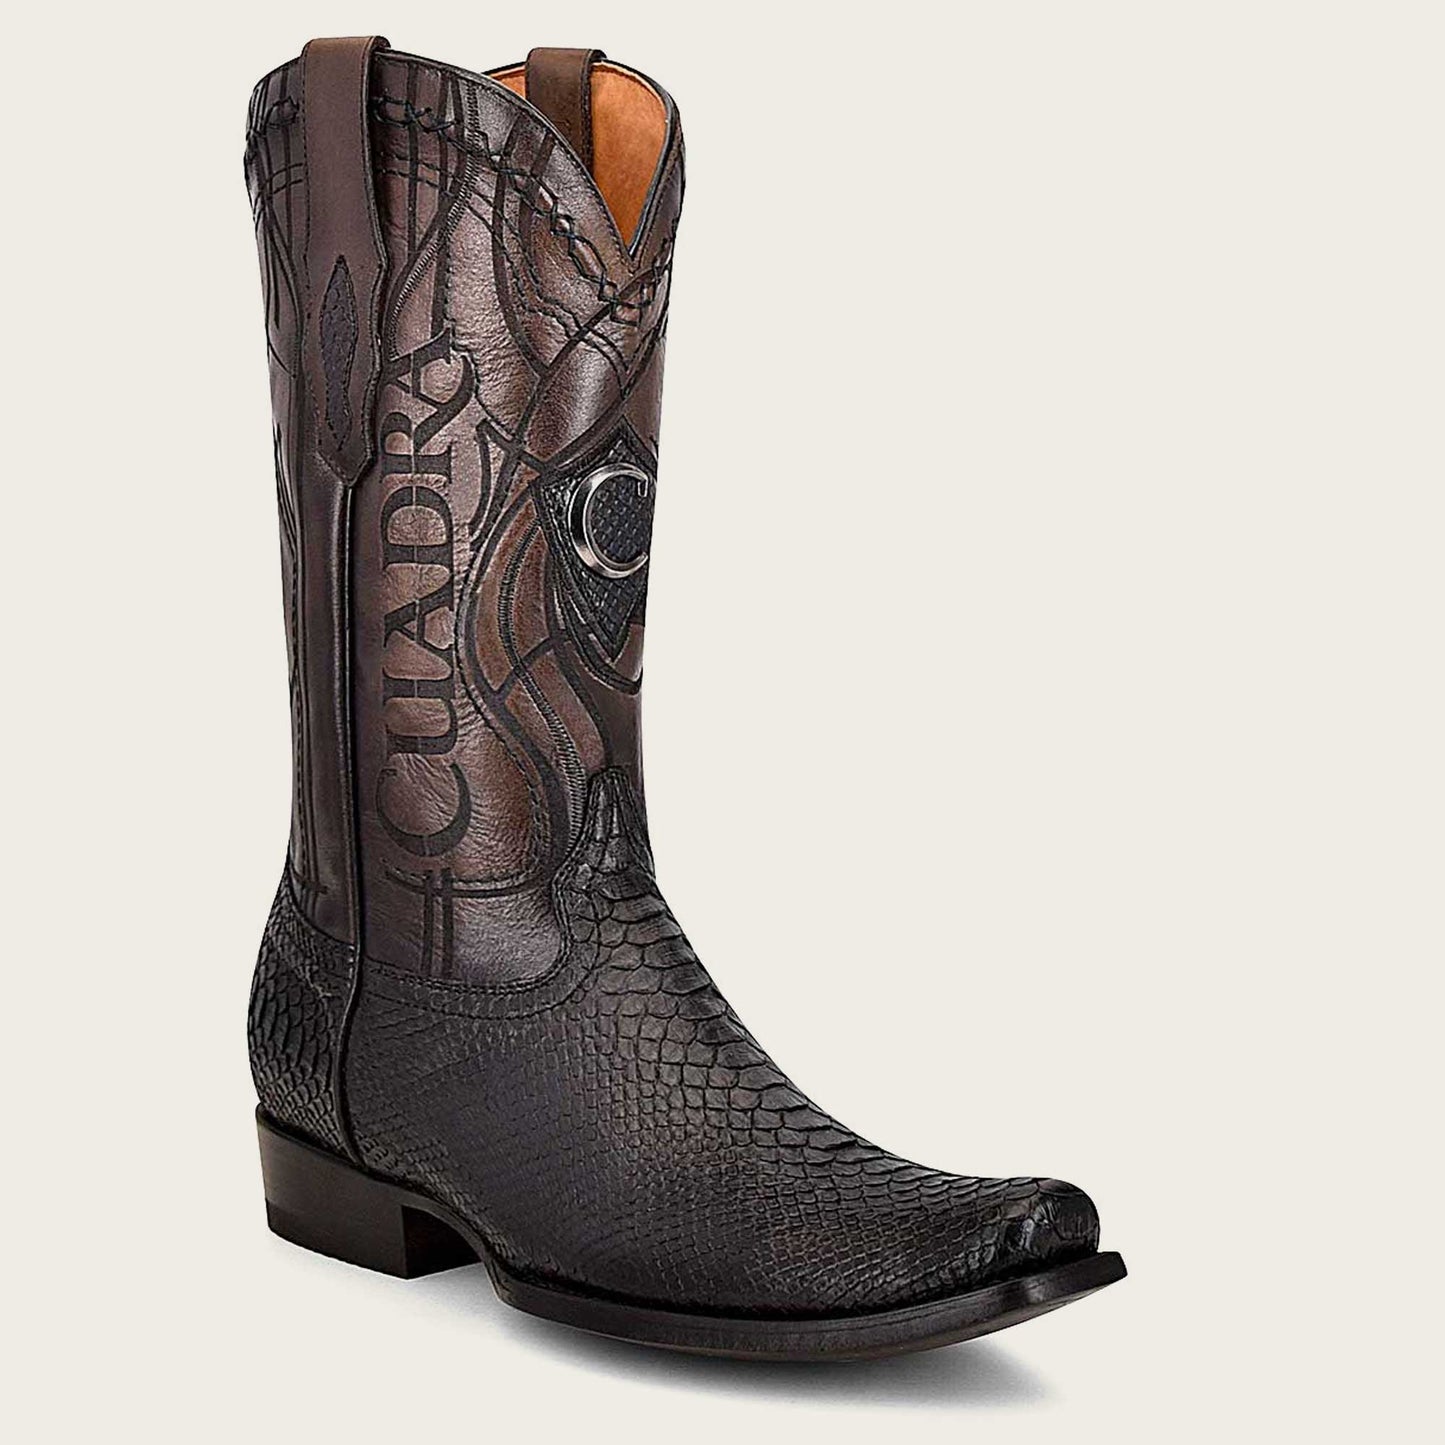 Engraved black python leather western boot